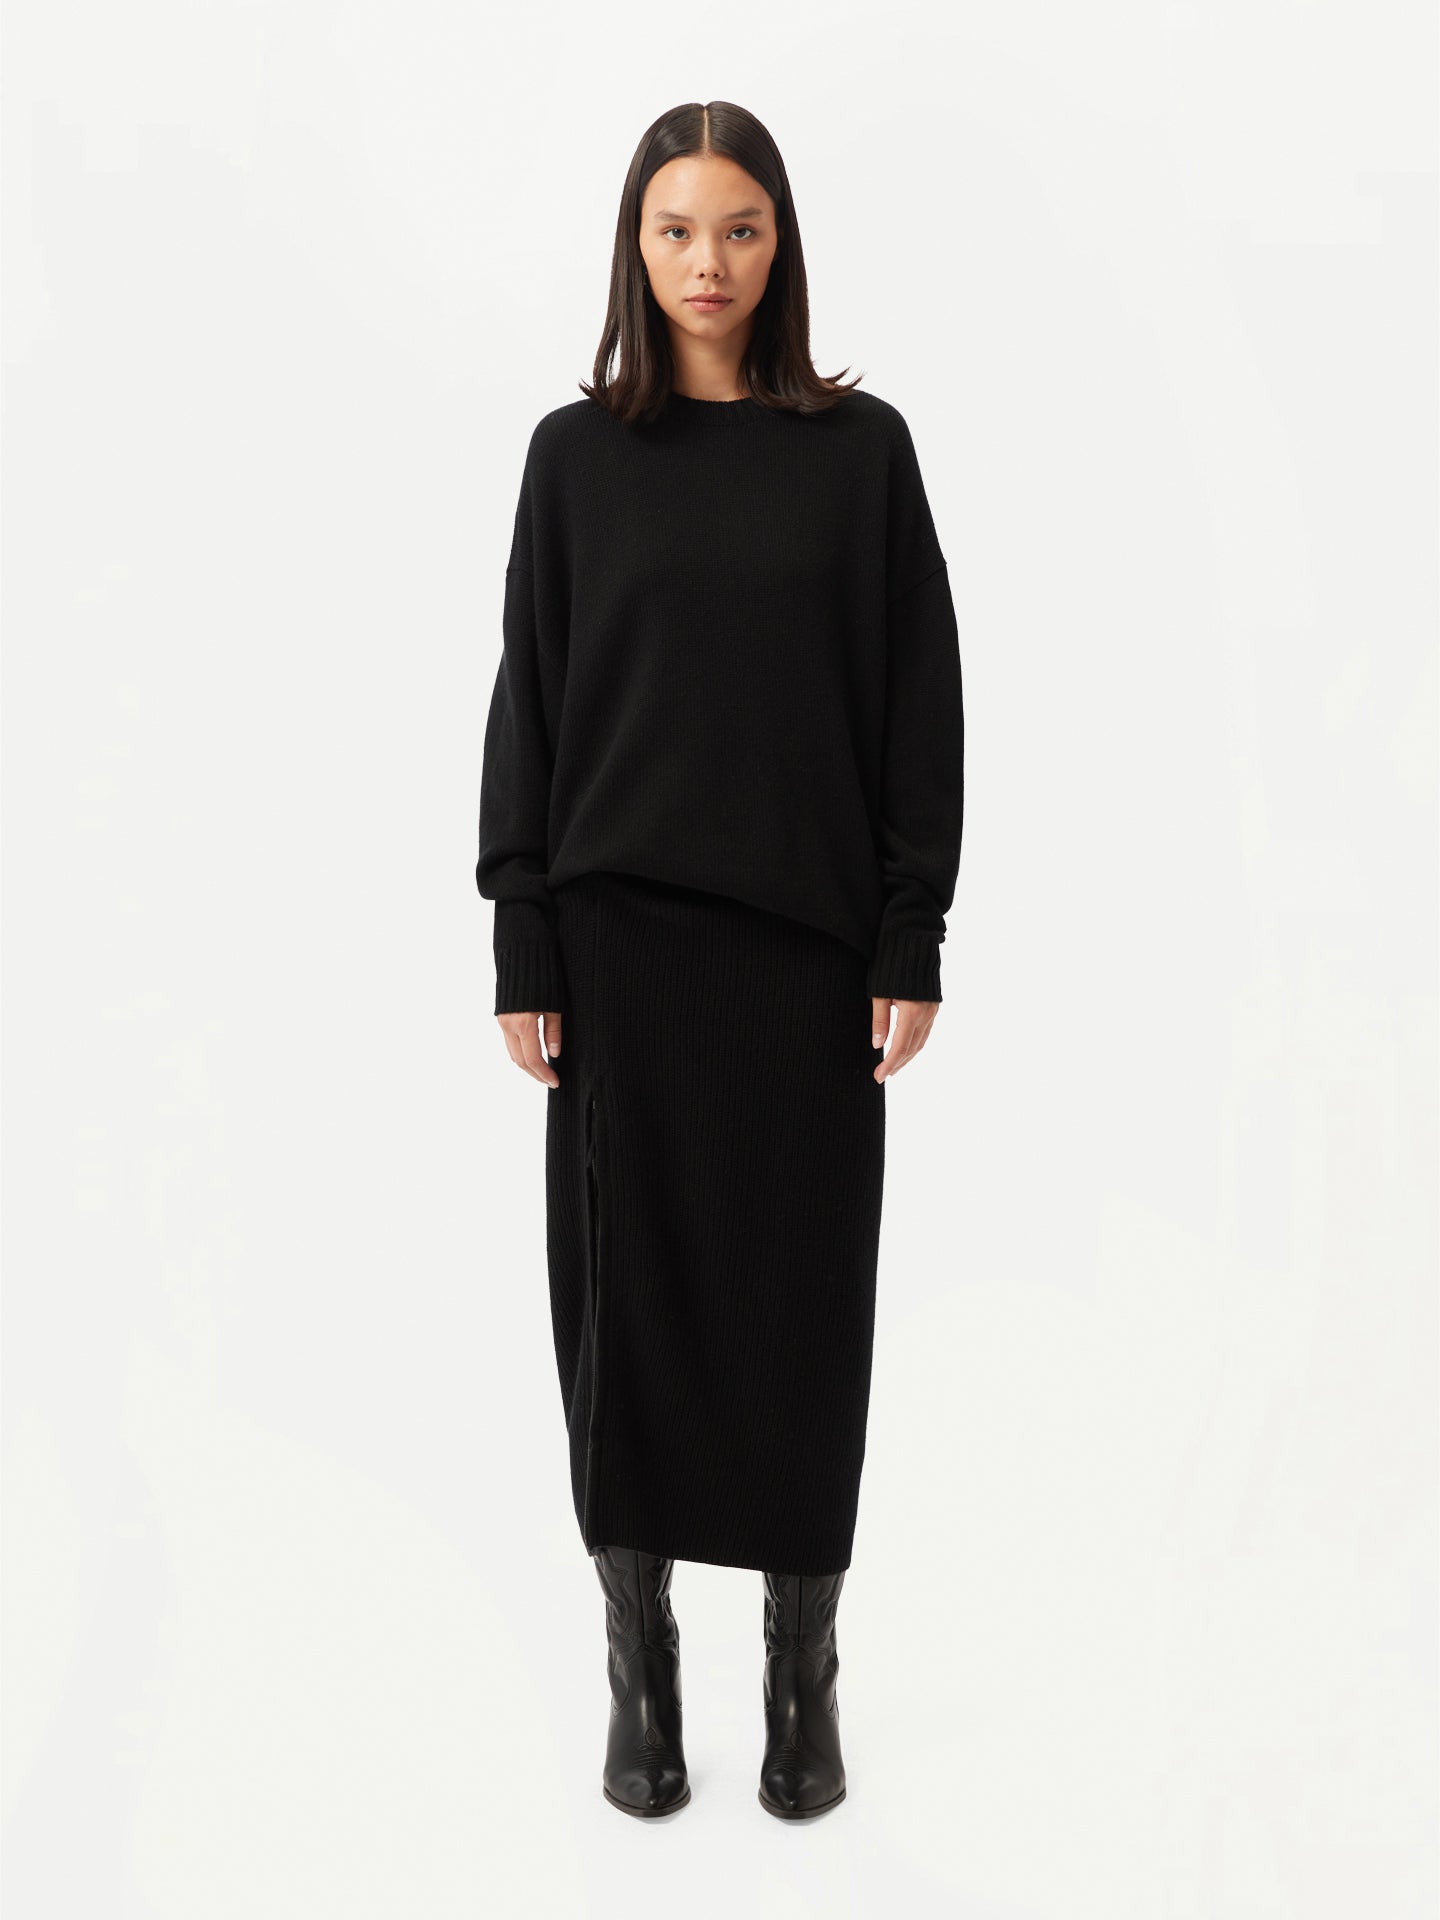 Women's Relaxed-Fit Cashmere Sweater Black - Gobi Cashmere